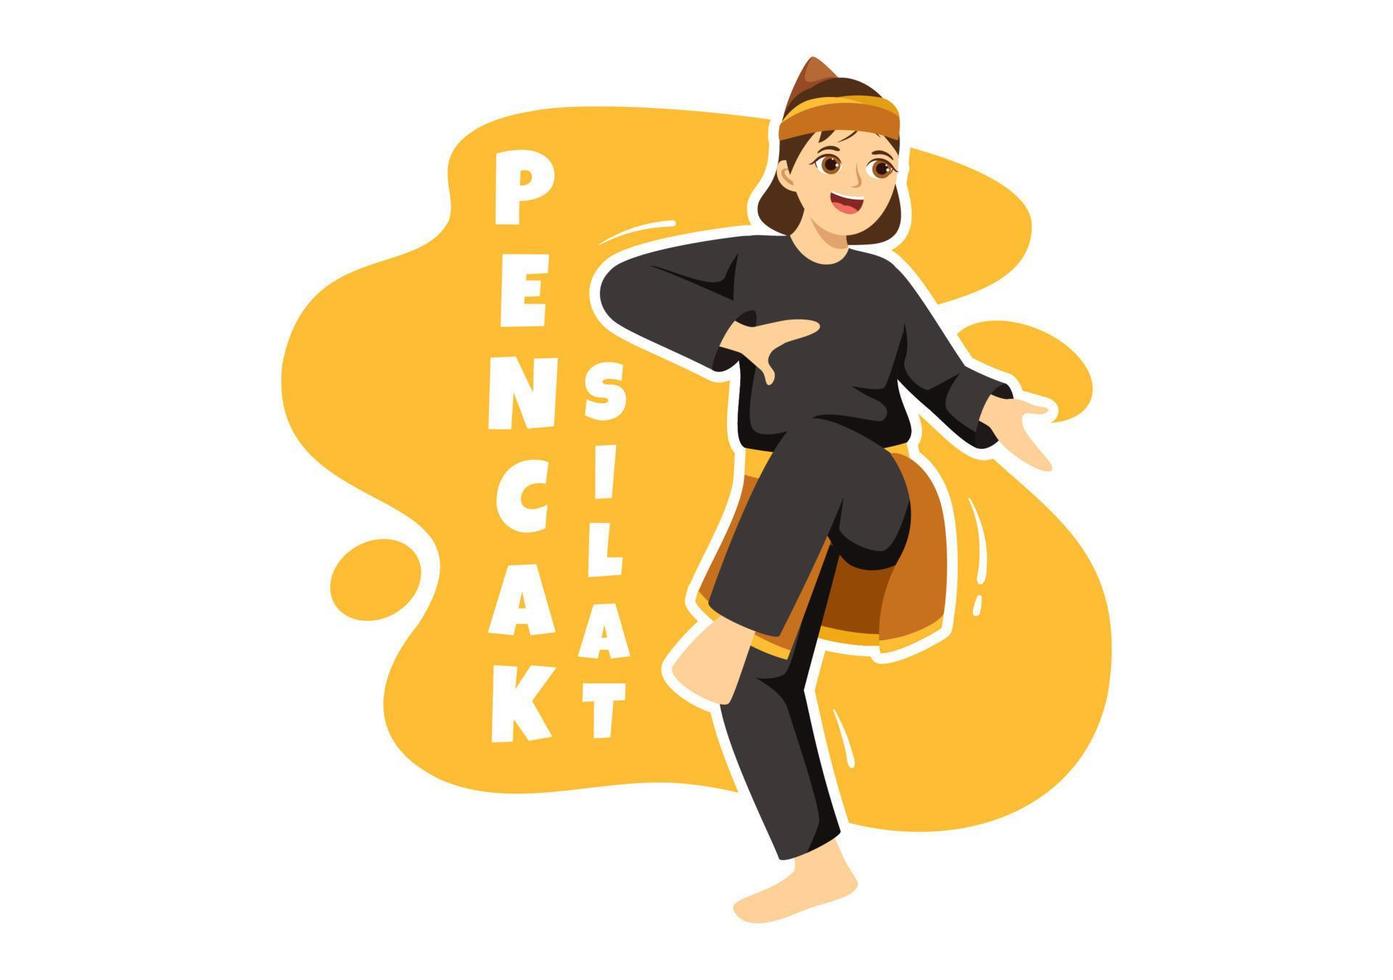 Pencak Silat Sport Illustration with People Pose Martial Artist from Indonesia for Web Banner or Landing Page in Flat Cartoon Hand Drawn Templates vector